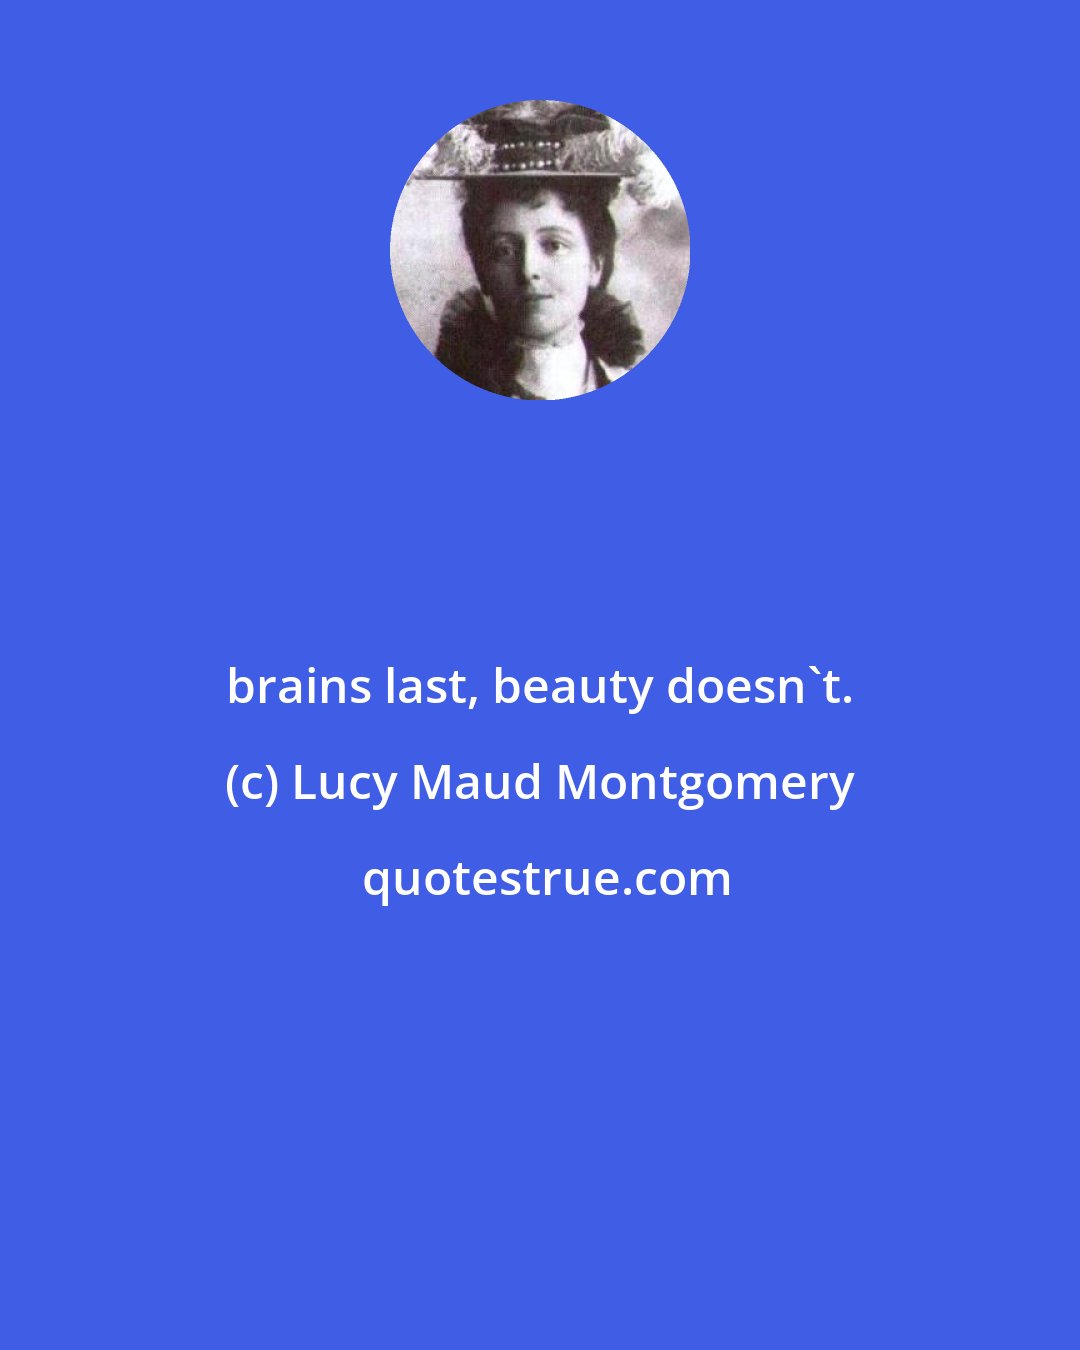 Lucy Maud Montgomery: brains last, beauty doesn't.